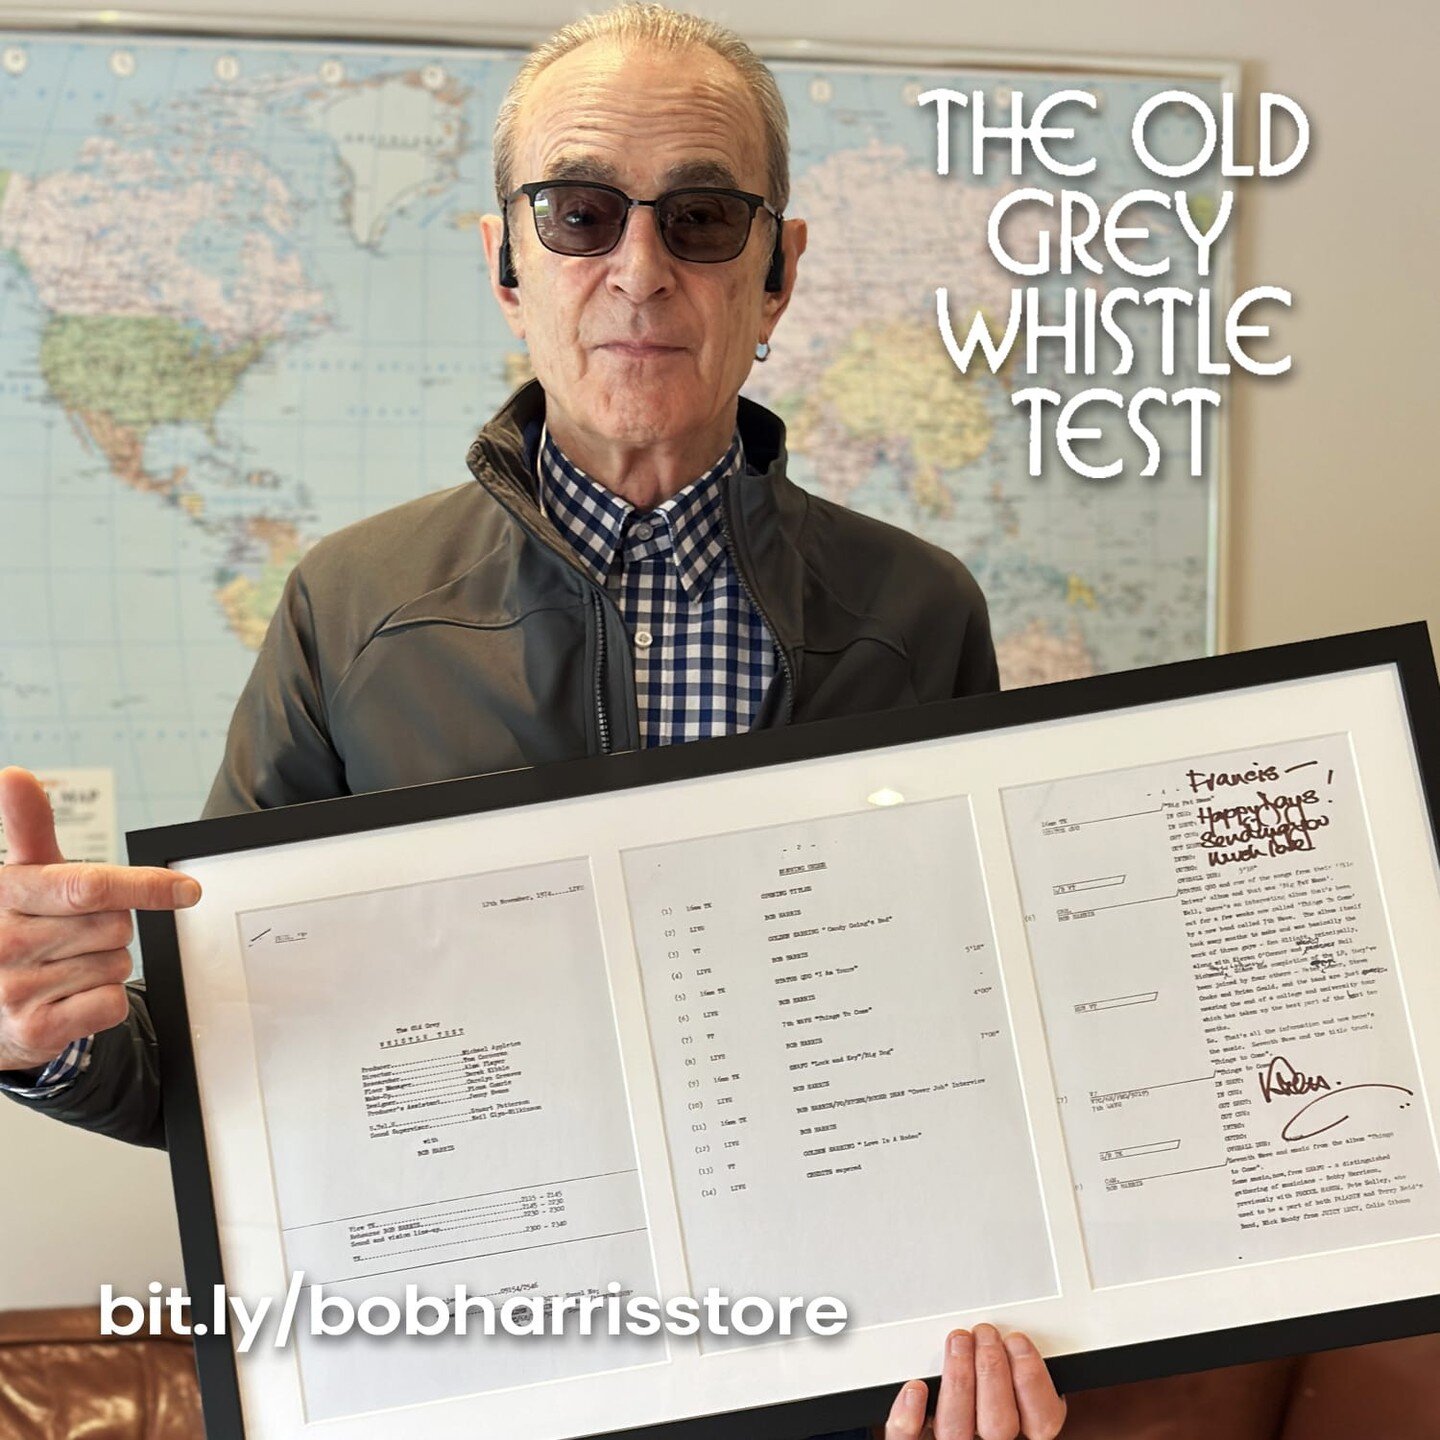 We&rsquo;re so delighted to see @francisrossiofficial take delivery of his very own #OGWT script - signed by @WhisperingBob - today! @statusquobandofficial featured on the show almost exactly 50 years ago &amp; Francis is seen here standing in front 